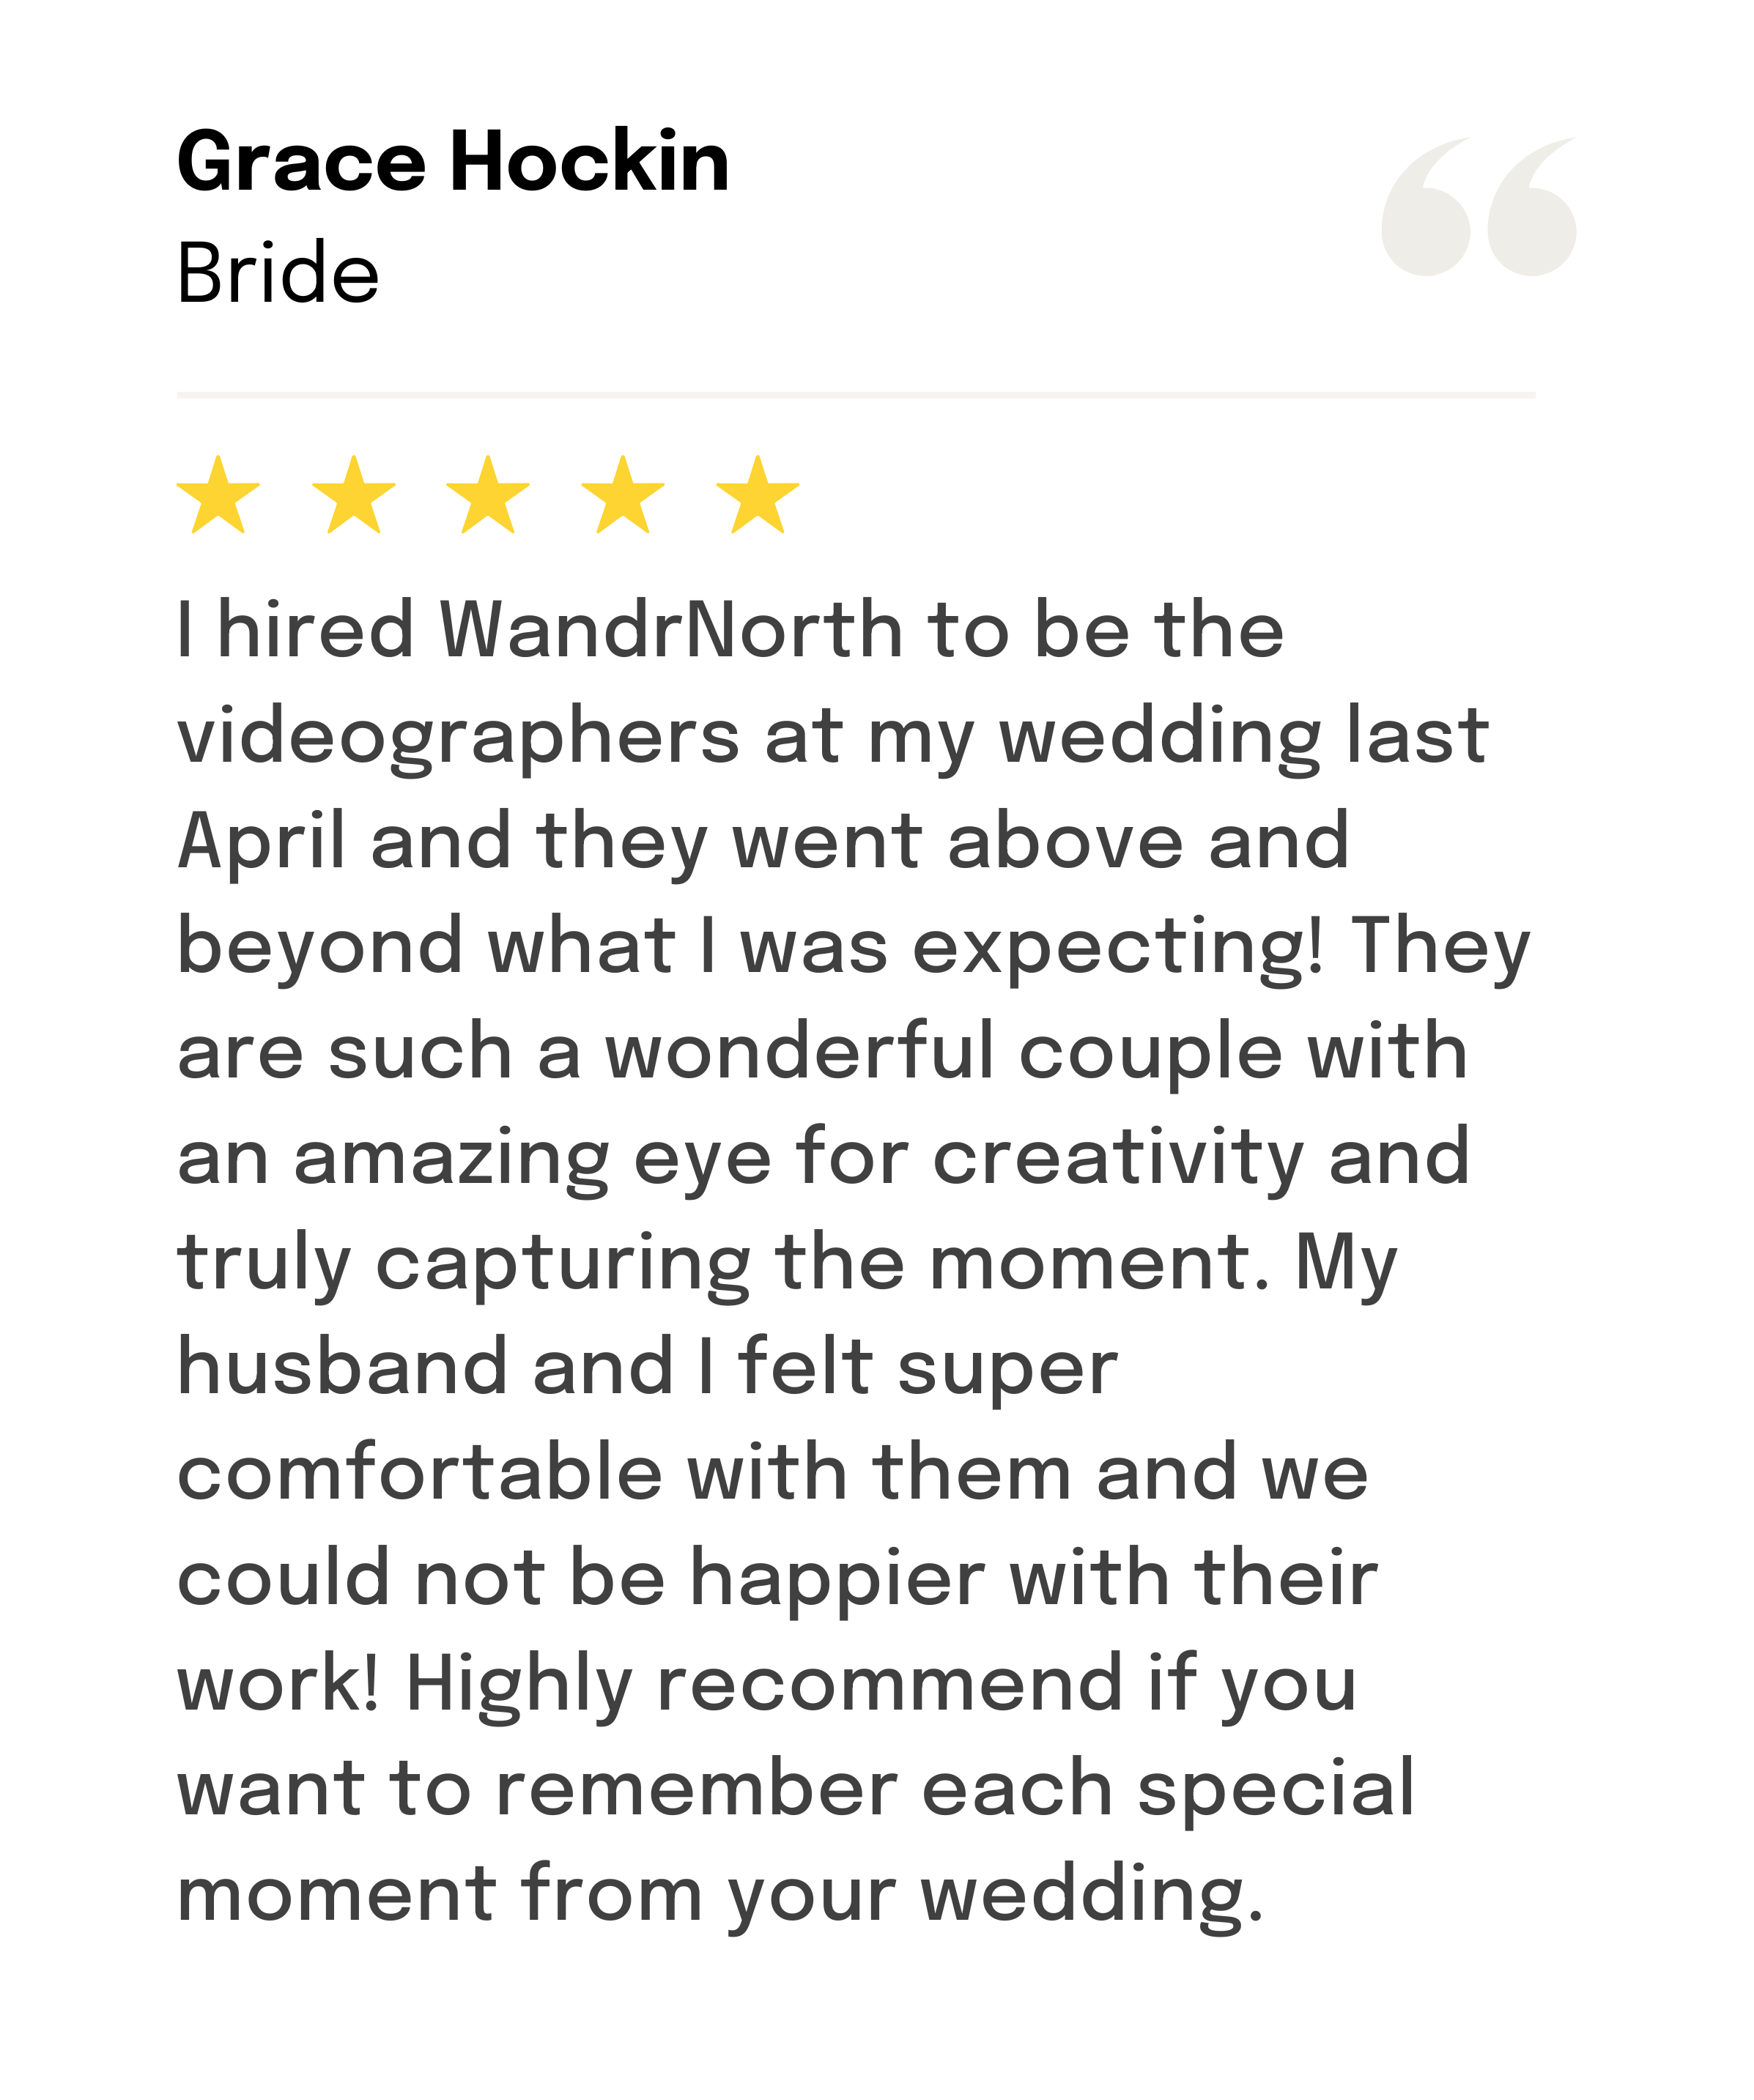 Grace writes a 5-star review to Wandr North for their wedding videography services.